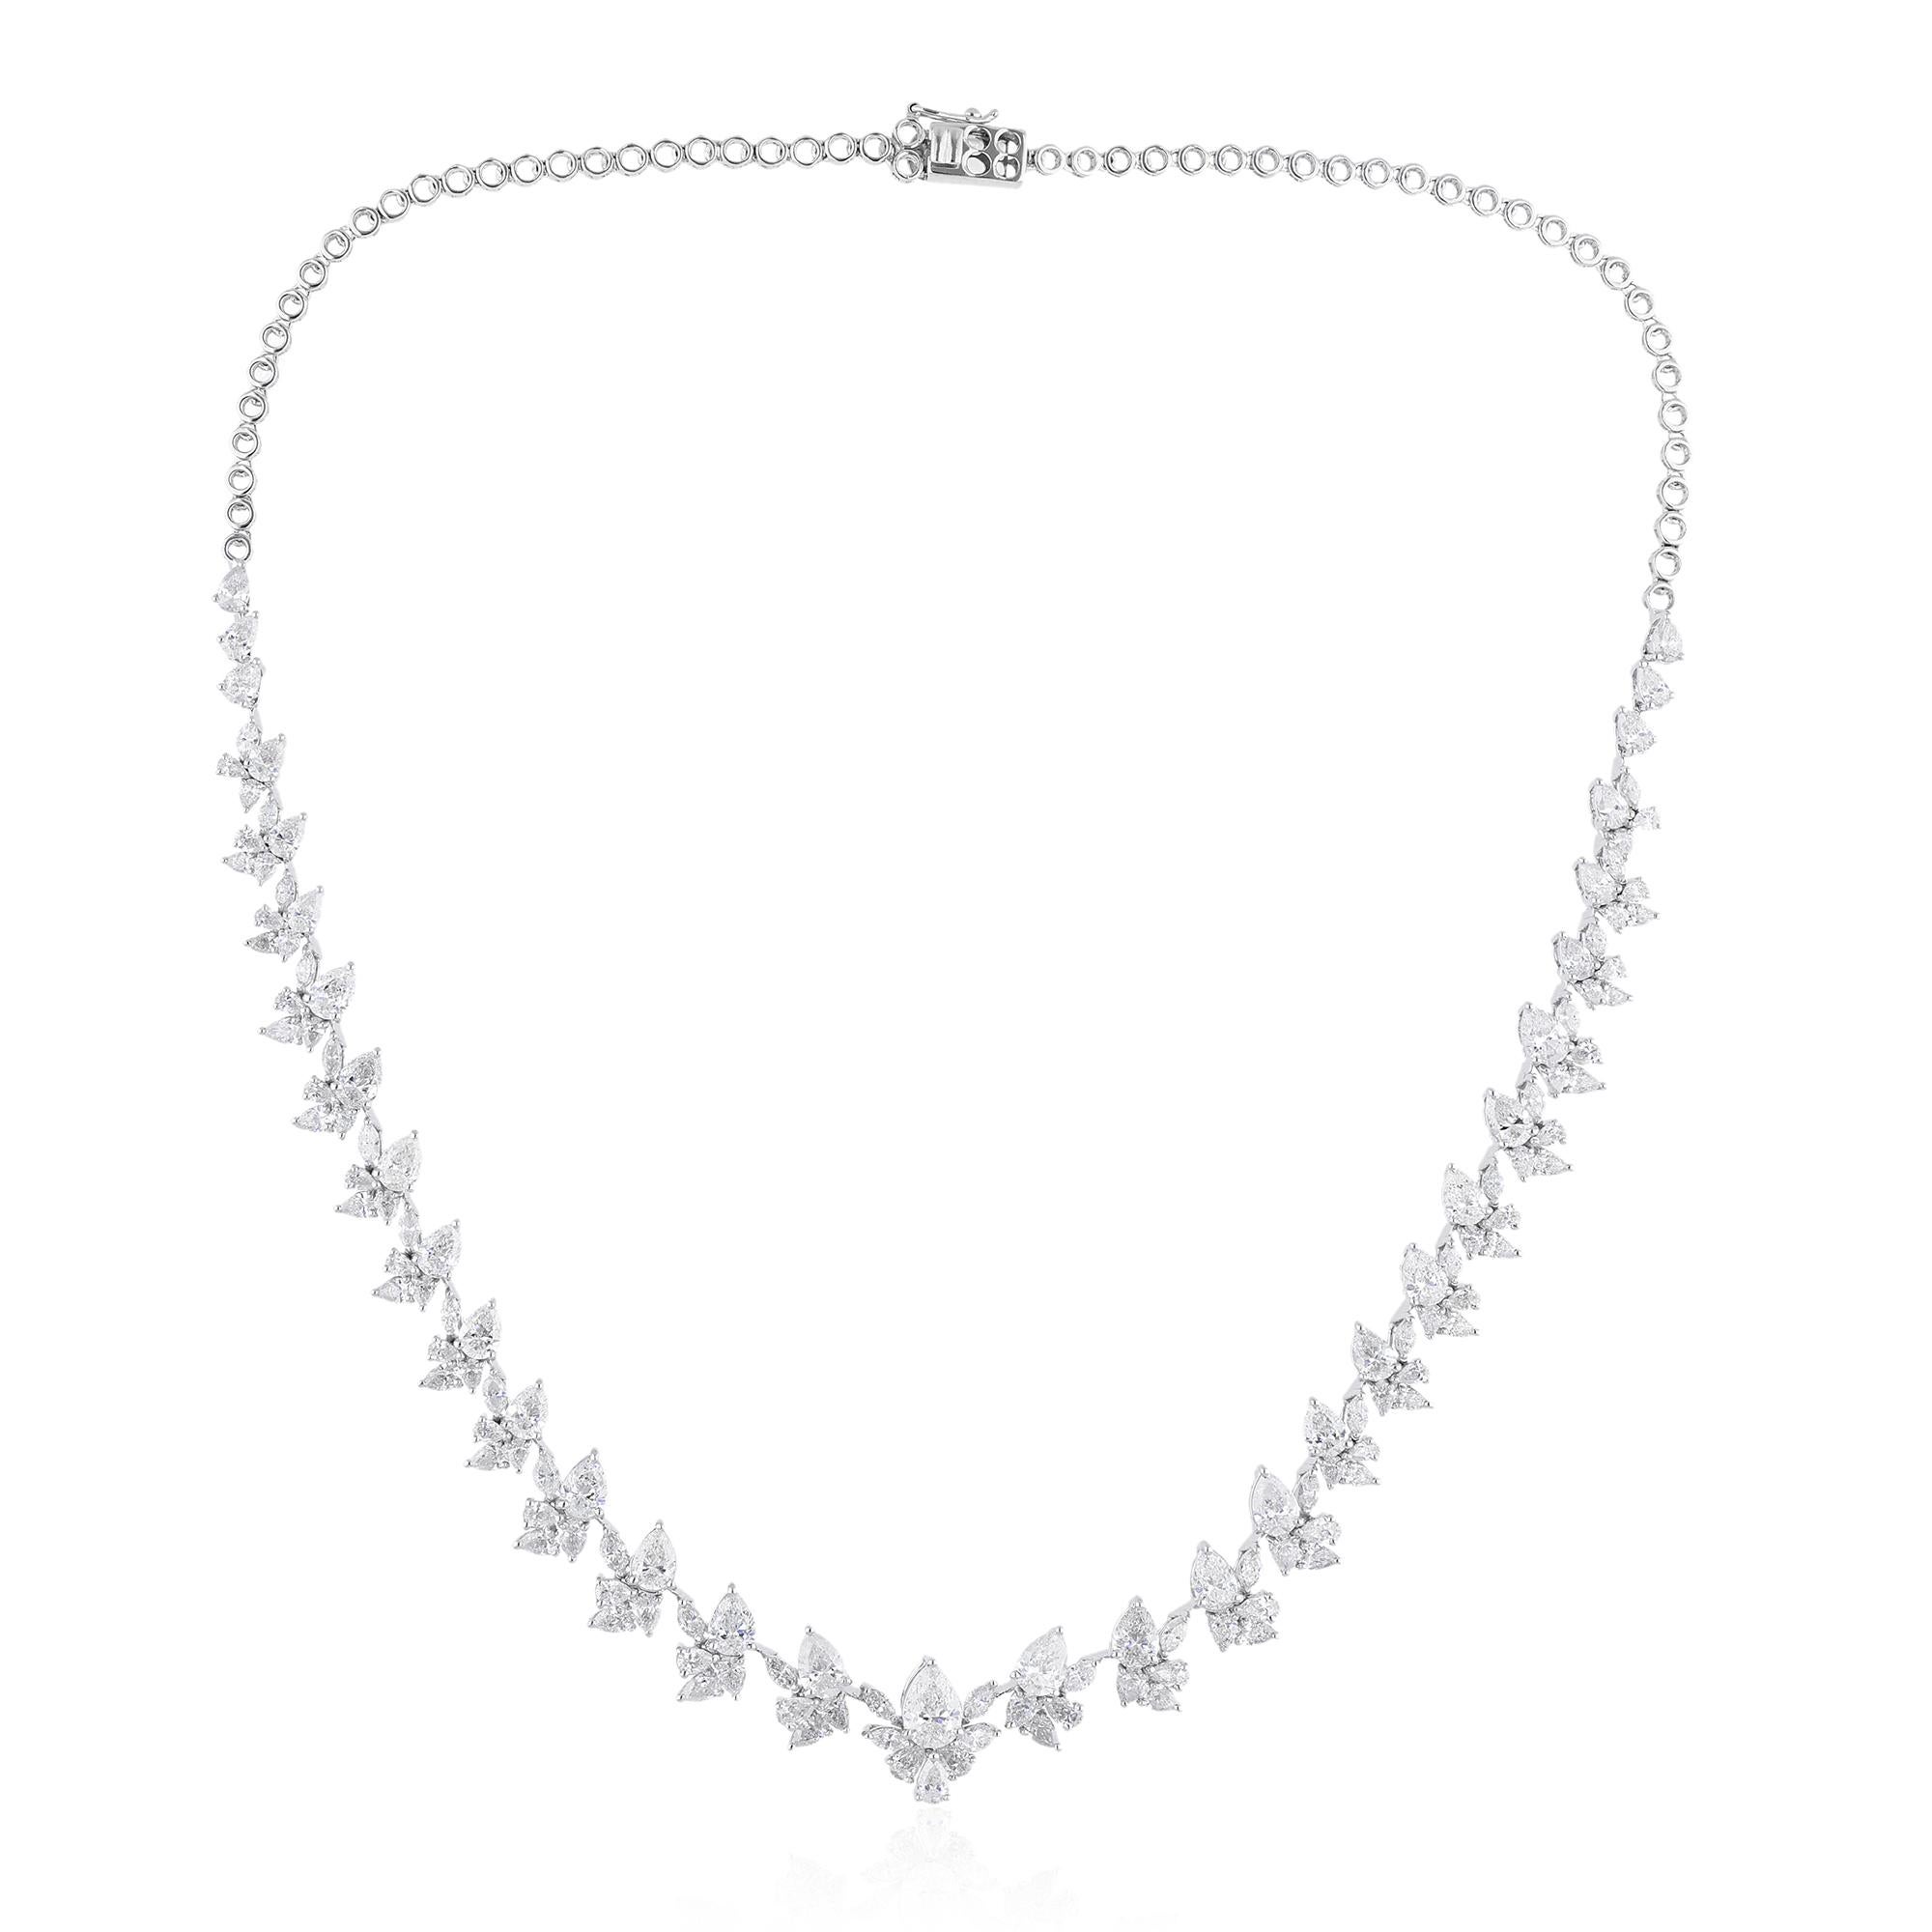 Indulge in the elegance of timeless sophistication with our SI clarity, HI color pear diamond charm necklace, crafted meticulously in 18 karat white gold. This exquisite piece of fine jewelry encapsulates luxury and refinement, designed to captivate